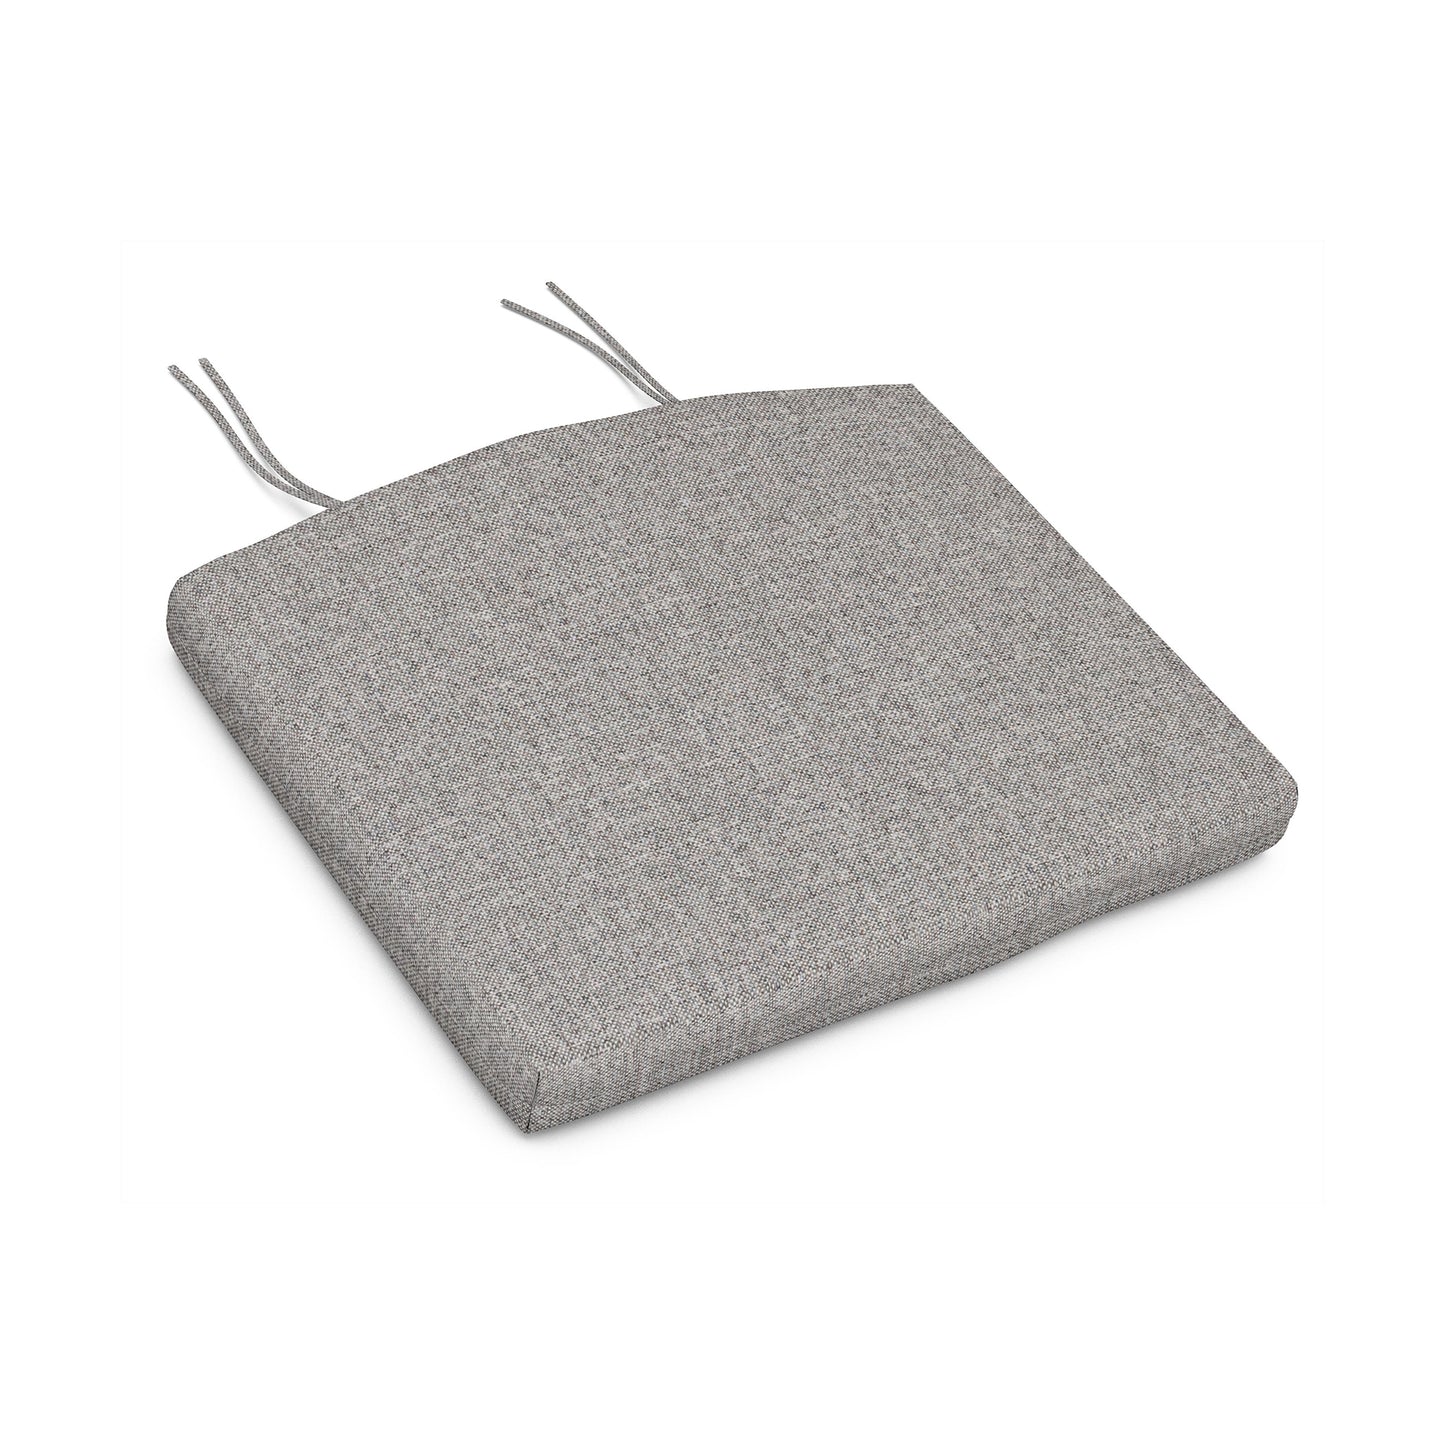 A square gray POLYWOOD XPWS0153 seat cushion with weather-resistant upholstery fabric and two attached tie straps, displayed against a white background.